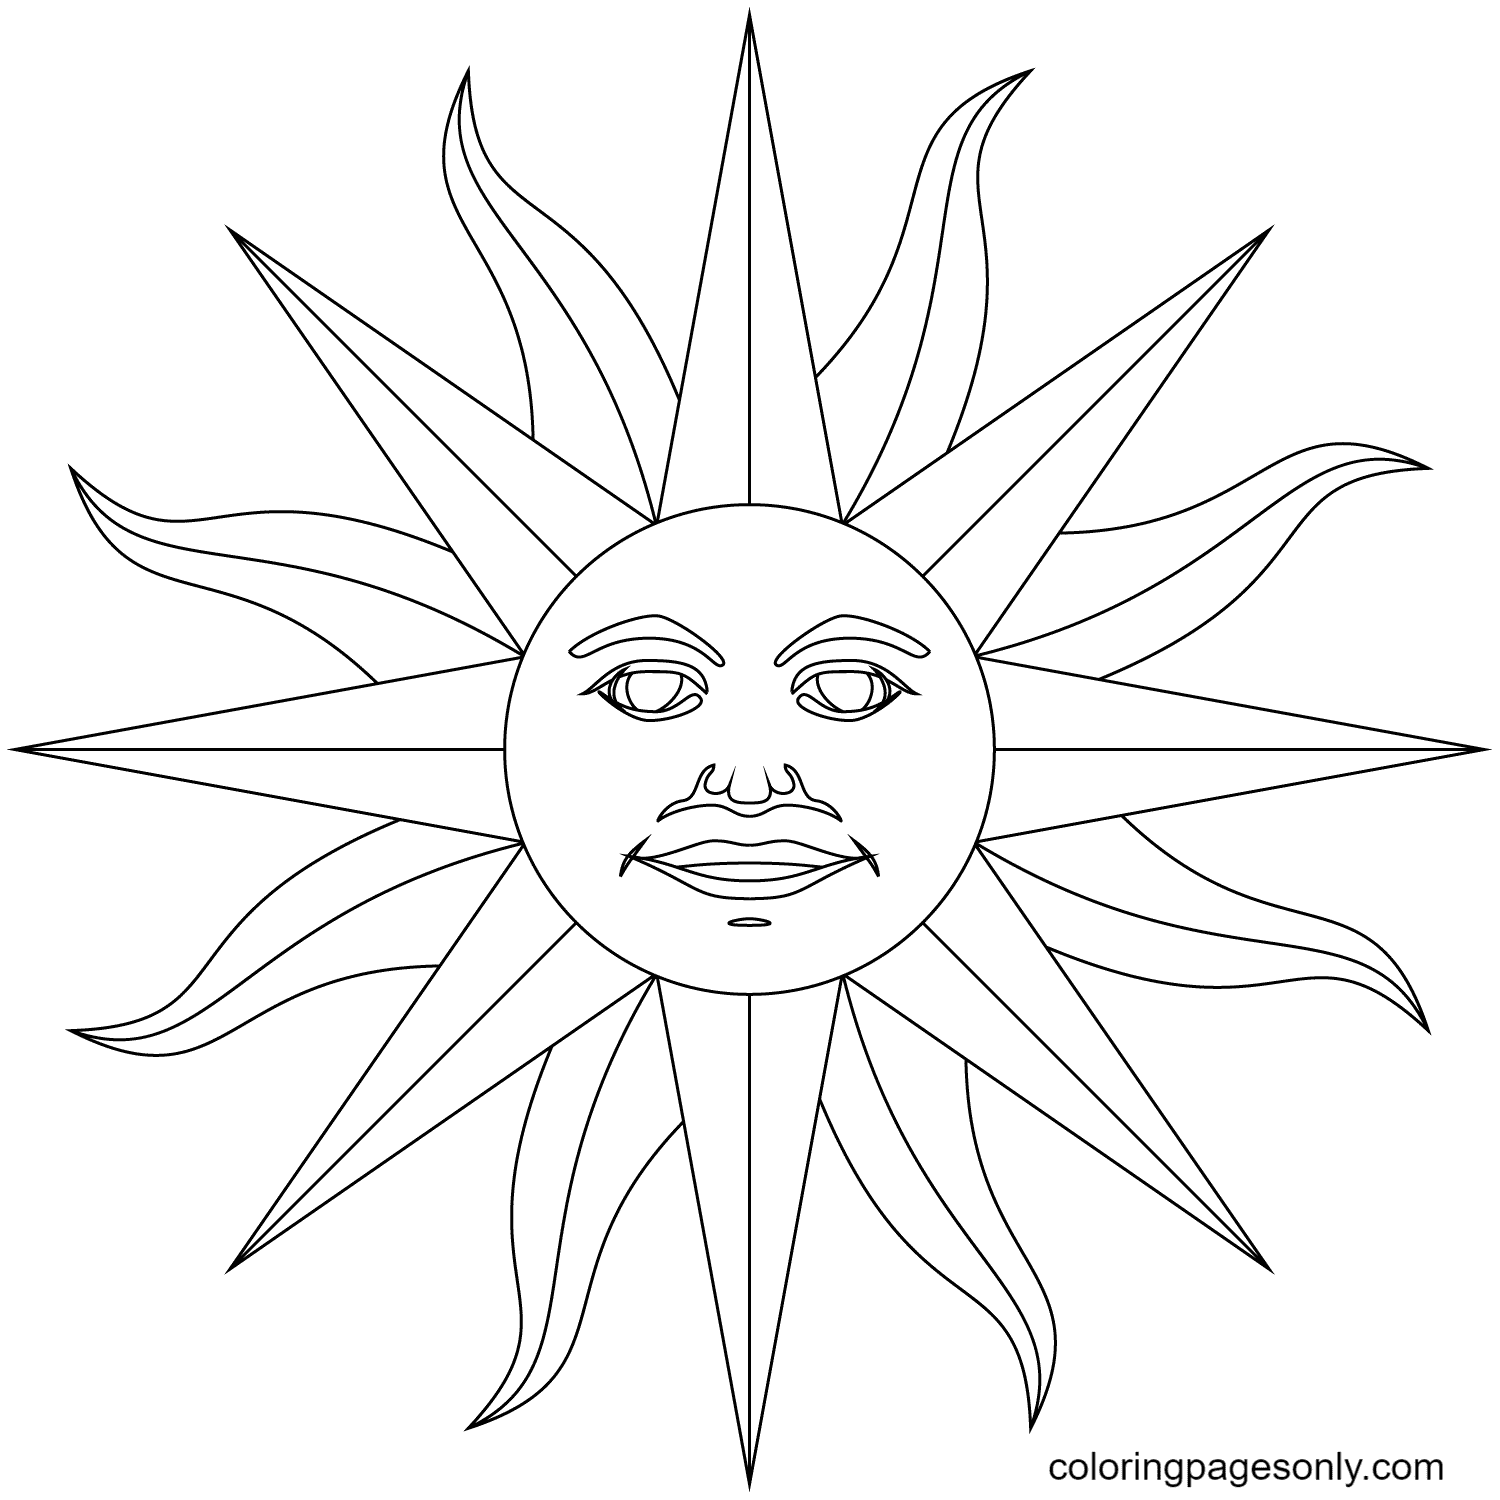 Inti – Incan God of Sun Coloring Page